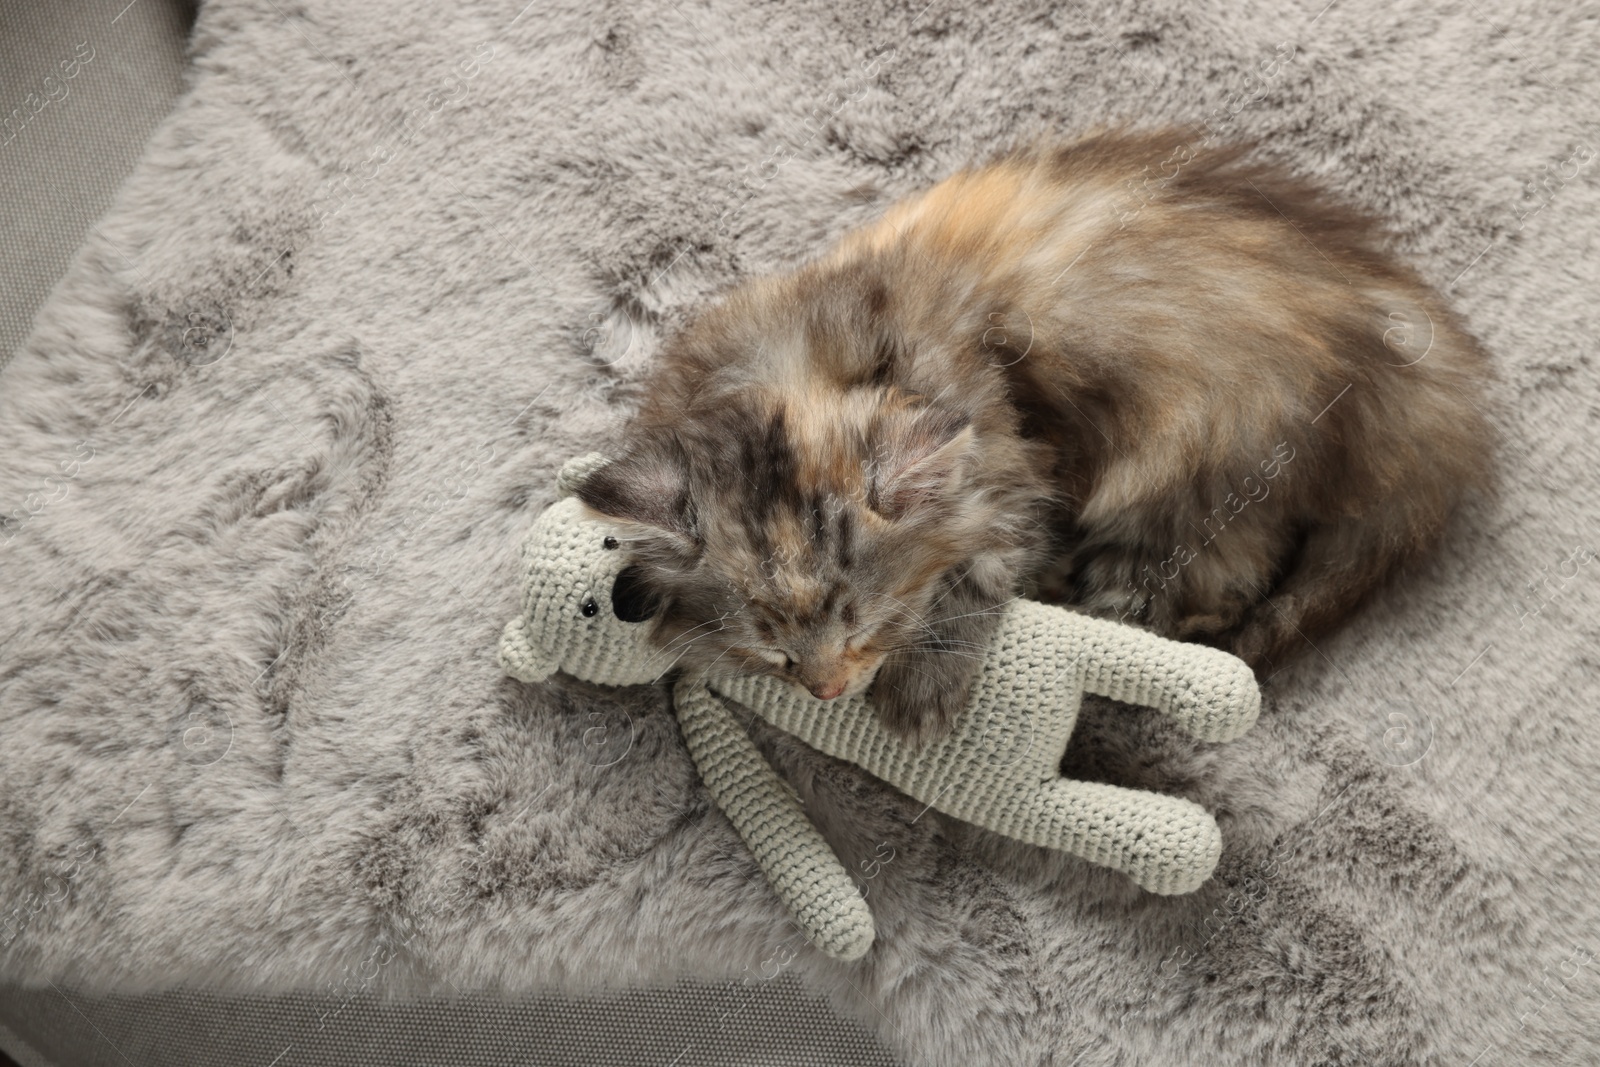 Photo of Cute kitten sleeping with toy on fuzzy grey blanket, top view